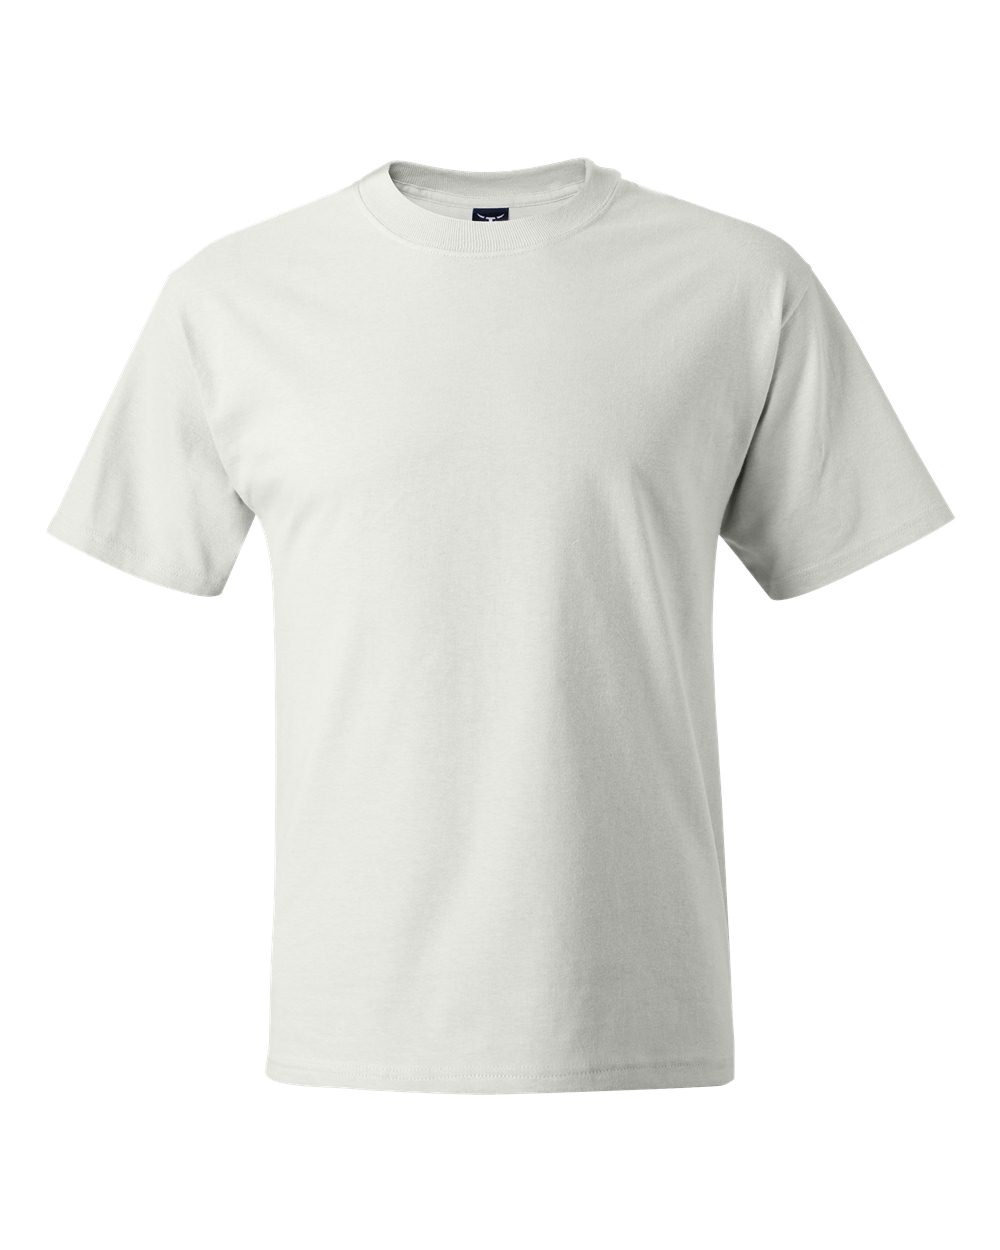 Beefy-T® Tall Short Sleeve T-Shirt-ComfortWash by Hanes